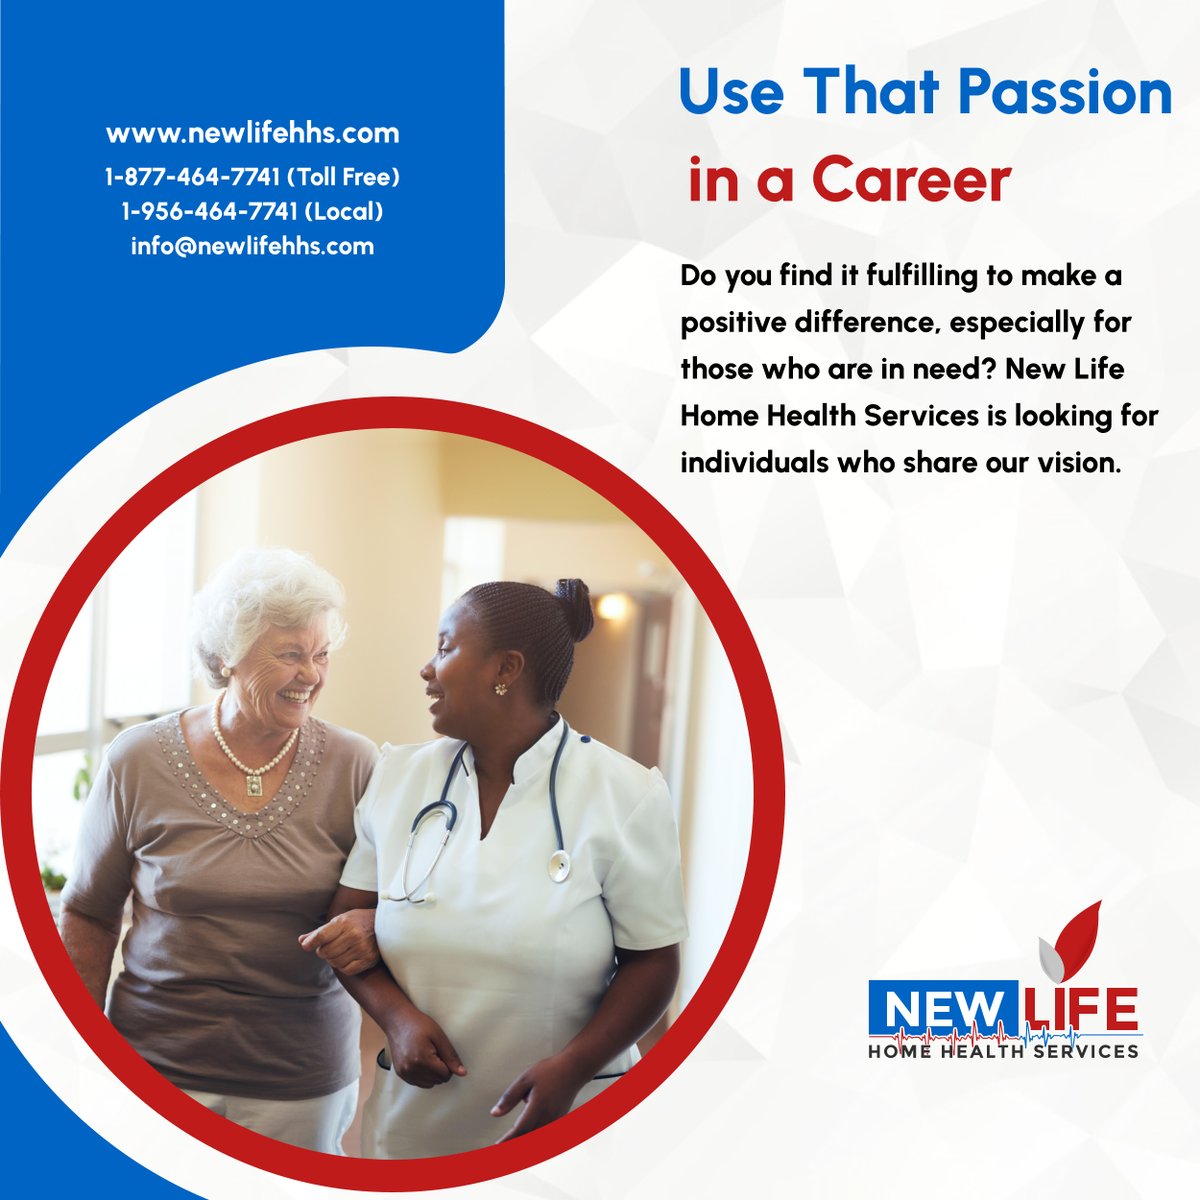 With us, you get to have the opportunity to improve people's lives and build meaningful connections with them. Use that passion in your career and join our team here: tinyurl.com/jnzee2ch. 

#HomeHealthCare #DonnaTX #PassionateCareer